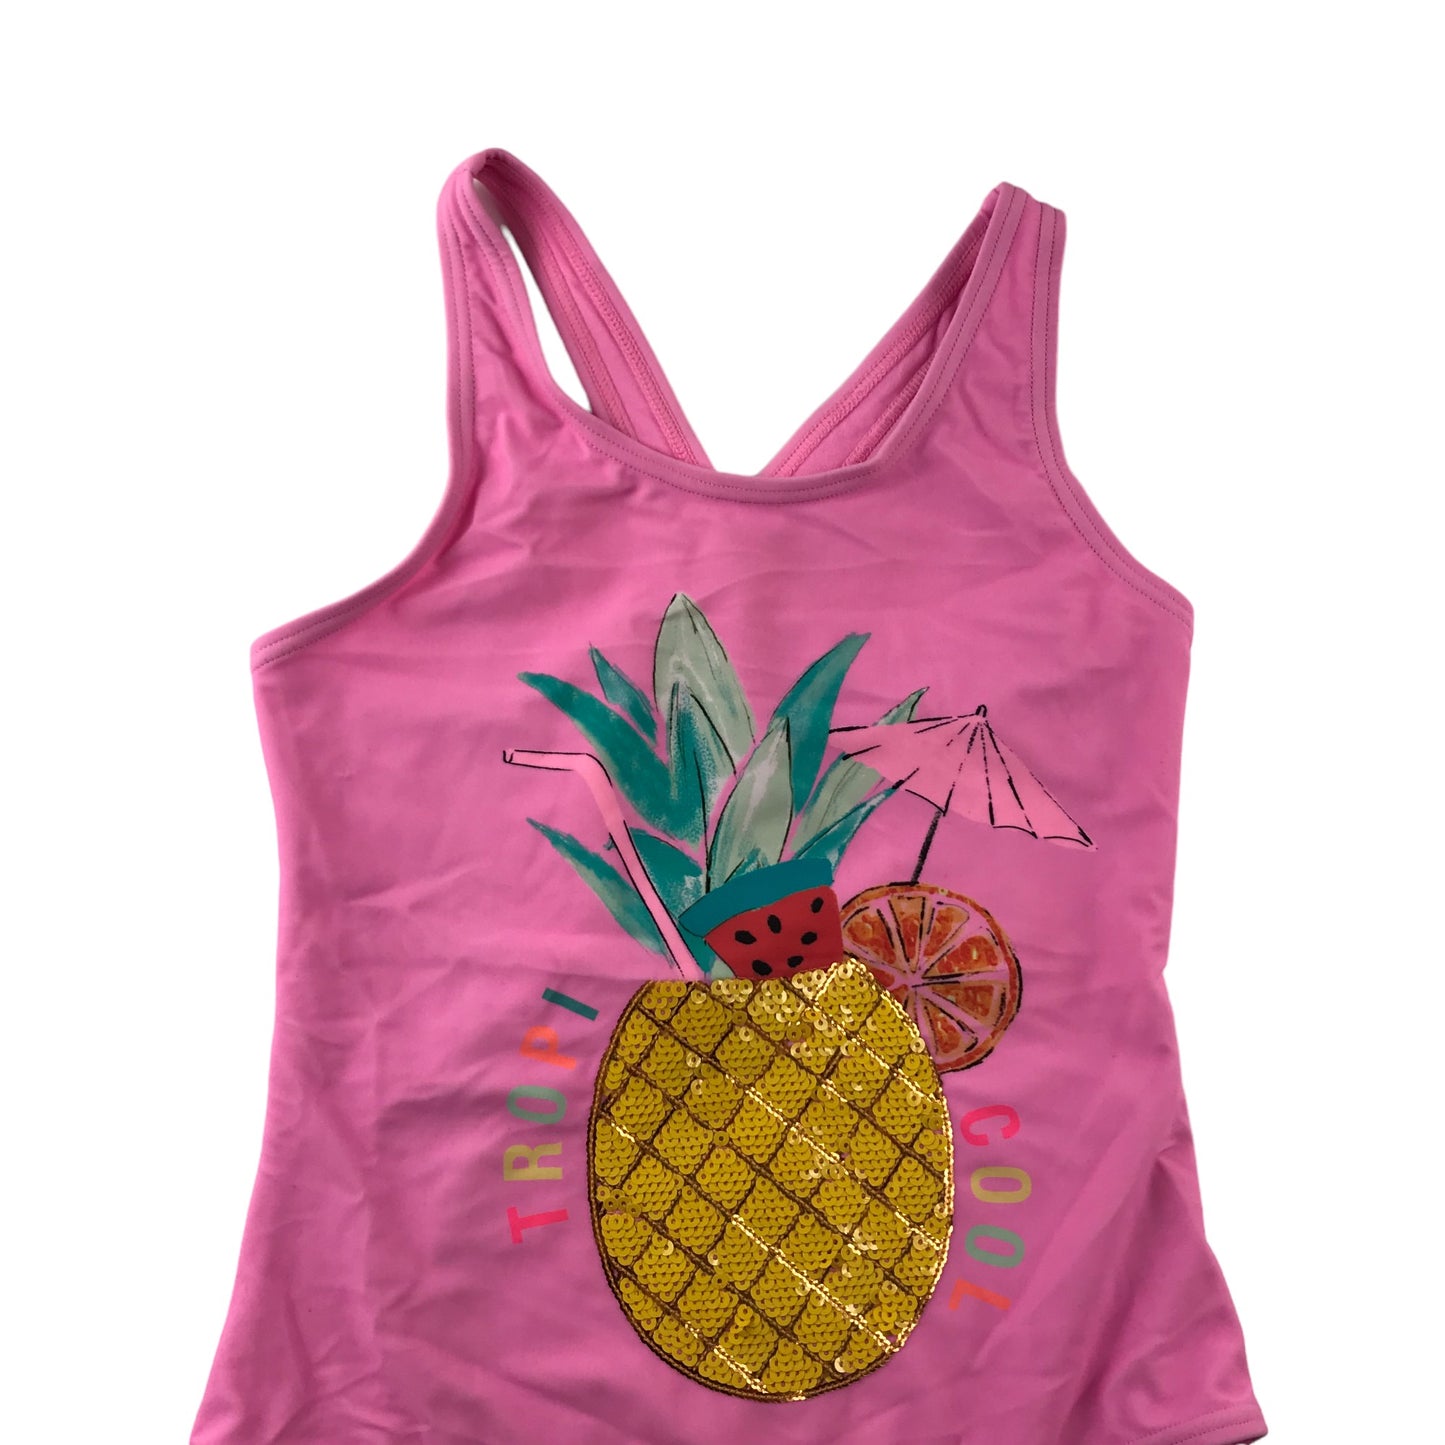 M&S Swimsuit Age 11 Pink Sequin Pineapple One Piece Cossie